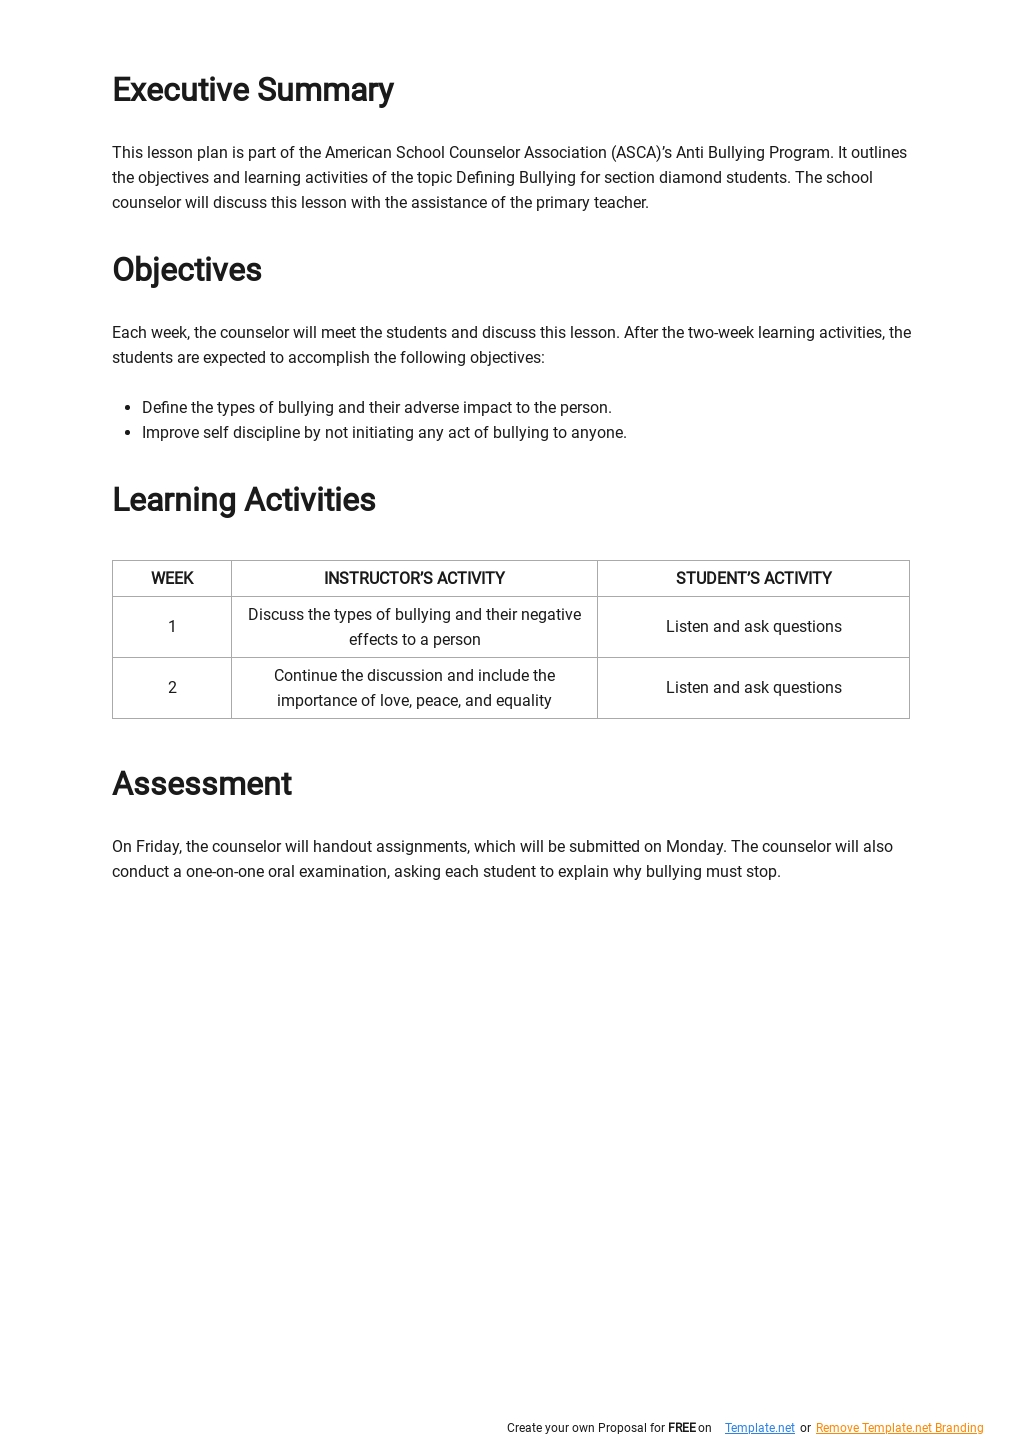 Free ASCA Bullying Lesson Plan Template 1.jpe